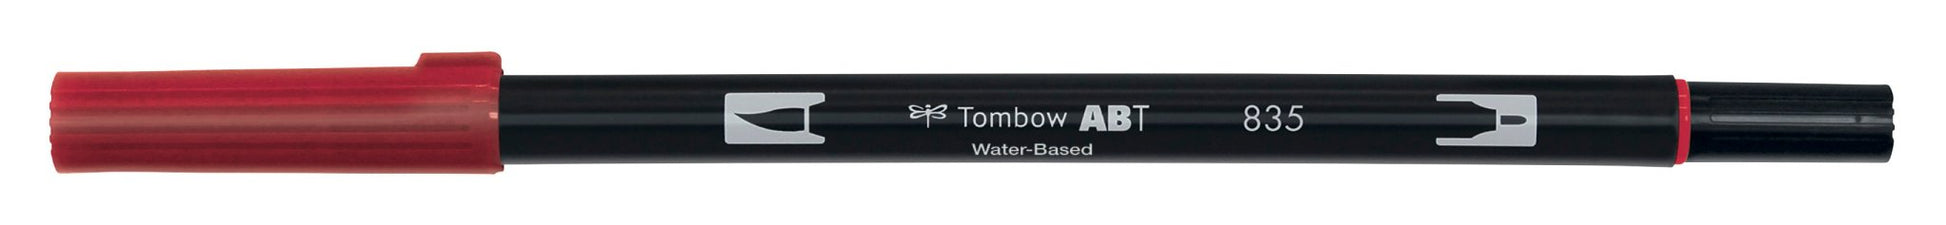 Tombow ABT dual brush pen - single colours - Tombow - Persimmon ABT-835 - millenotes